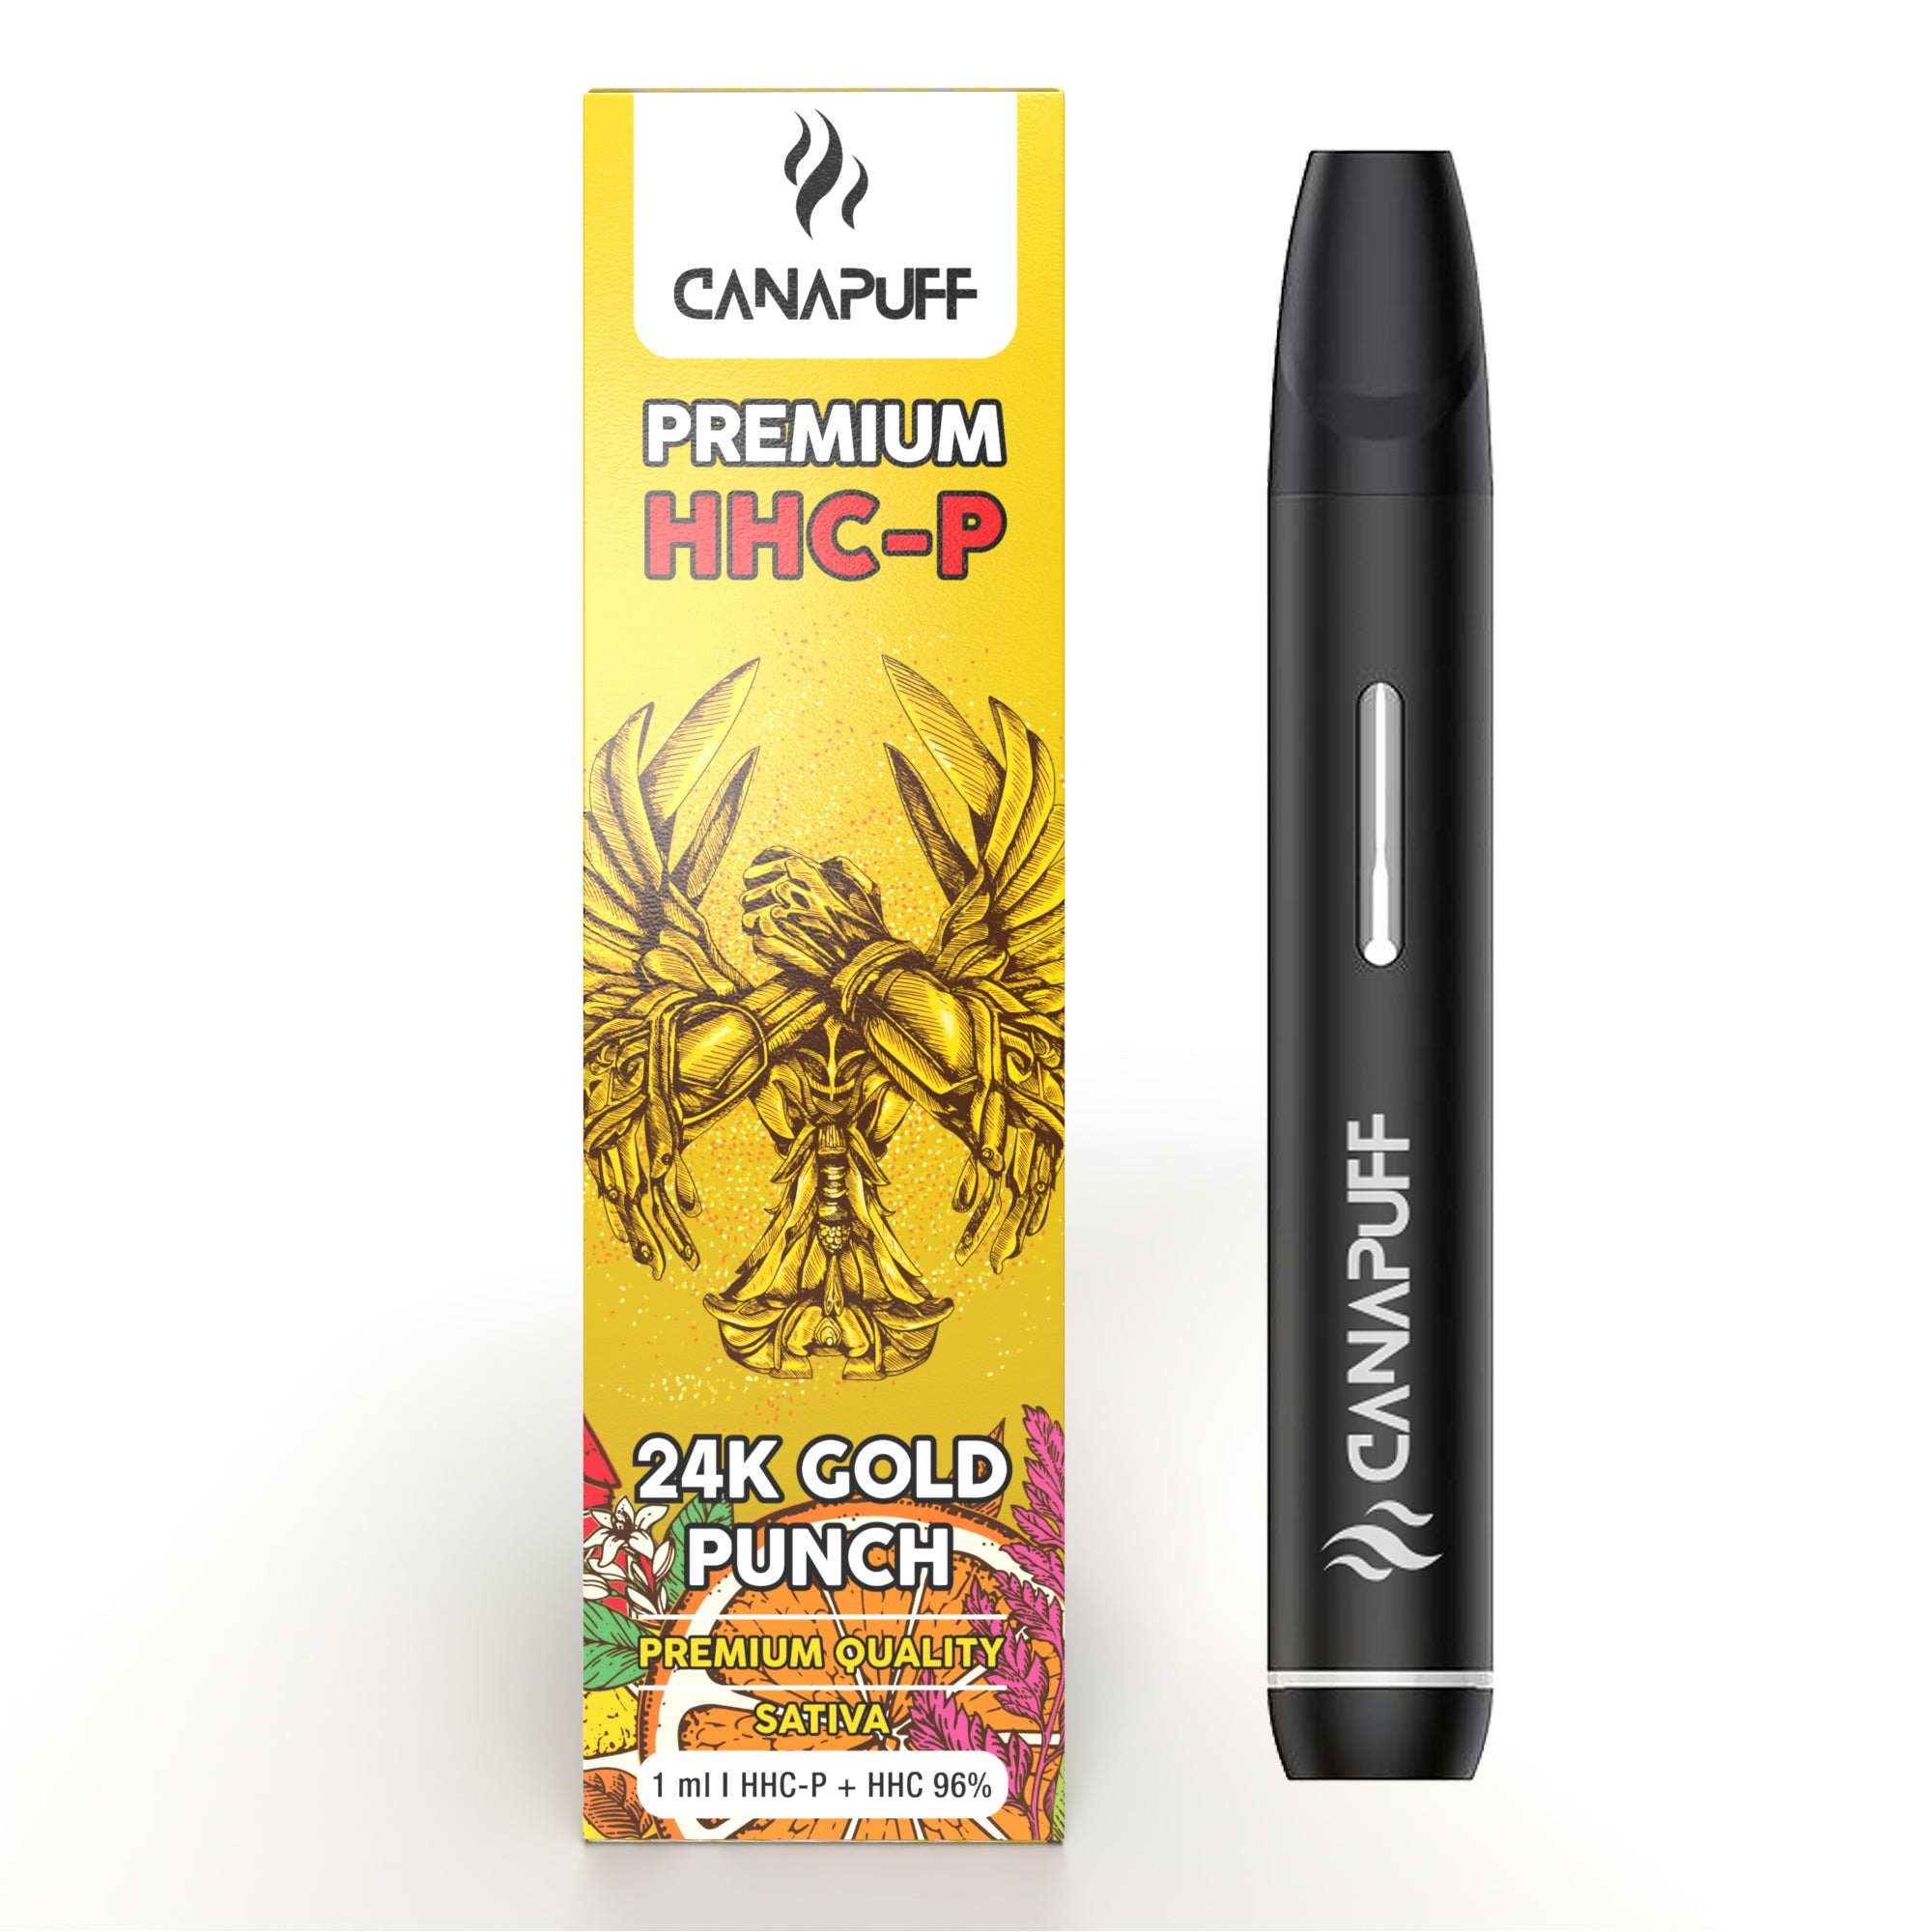 24K GOLD PUNCH 96% HHC-P - CanaPuff - ONE USE - 1ml